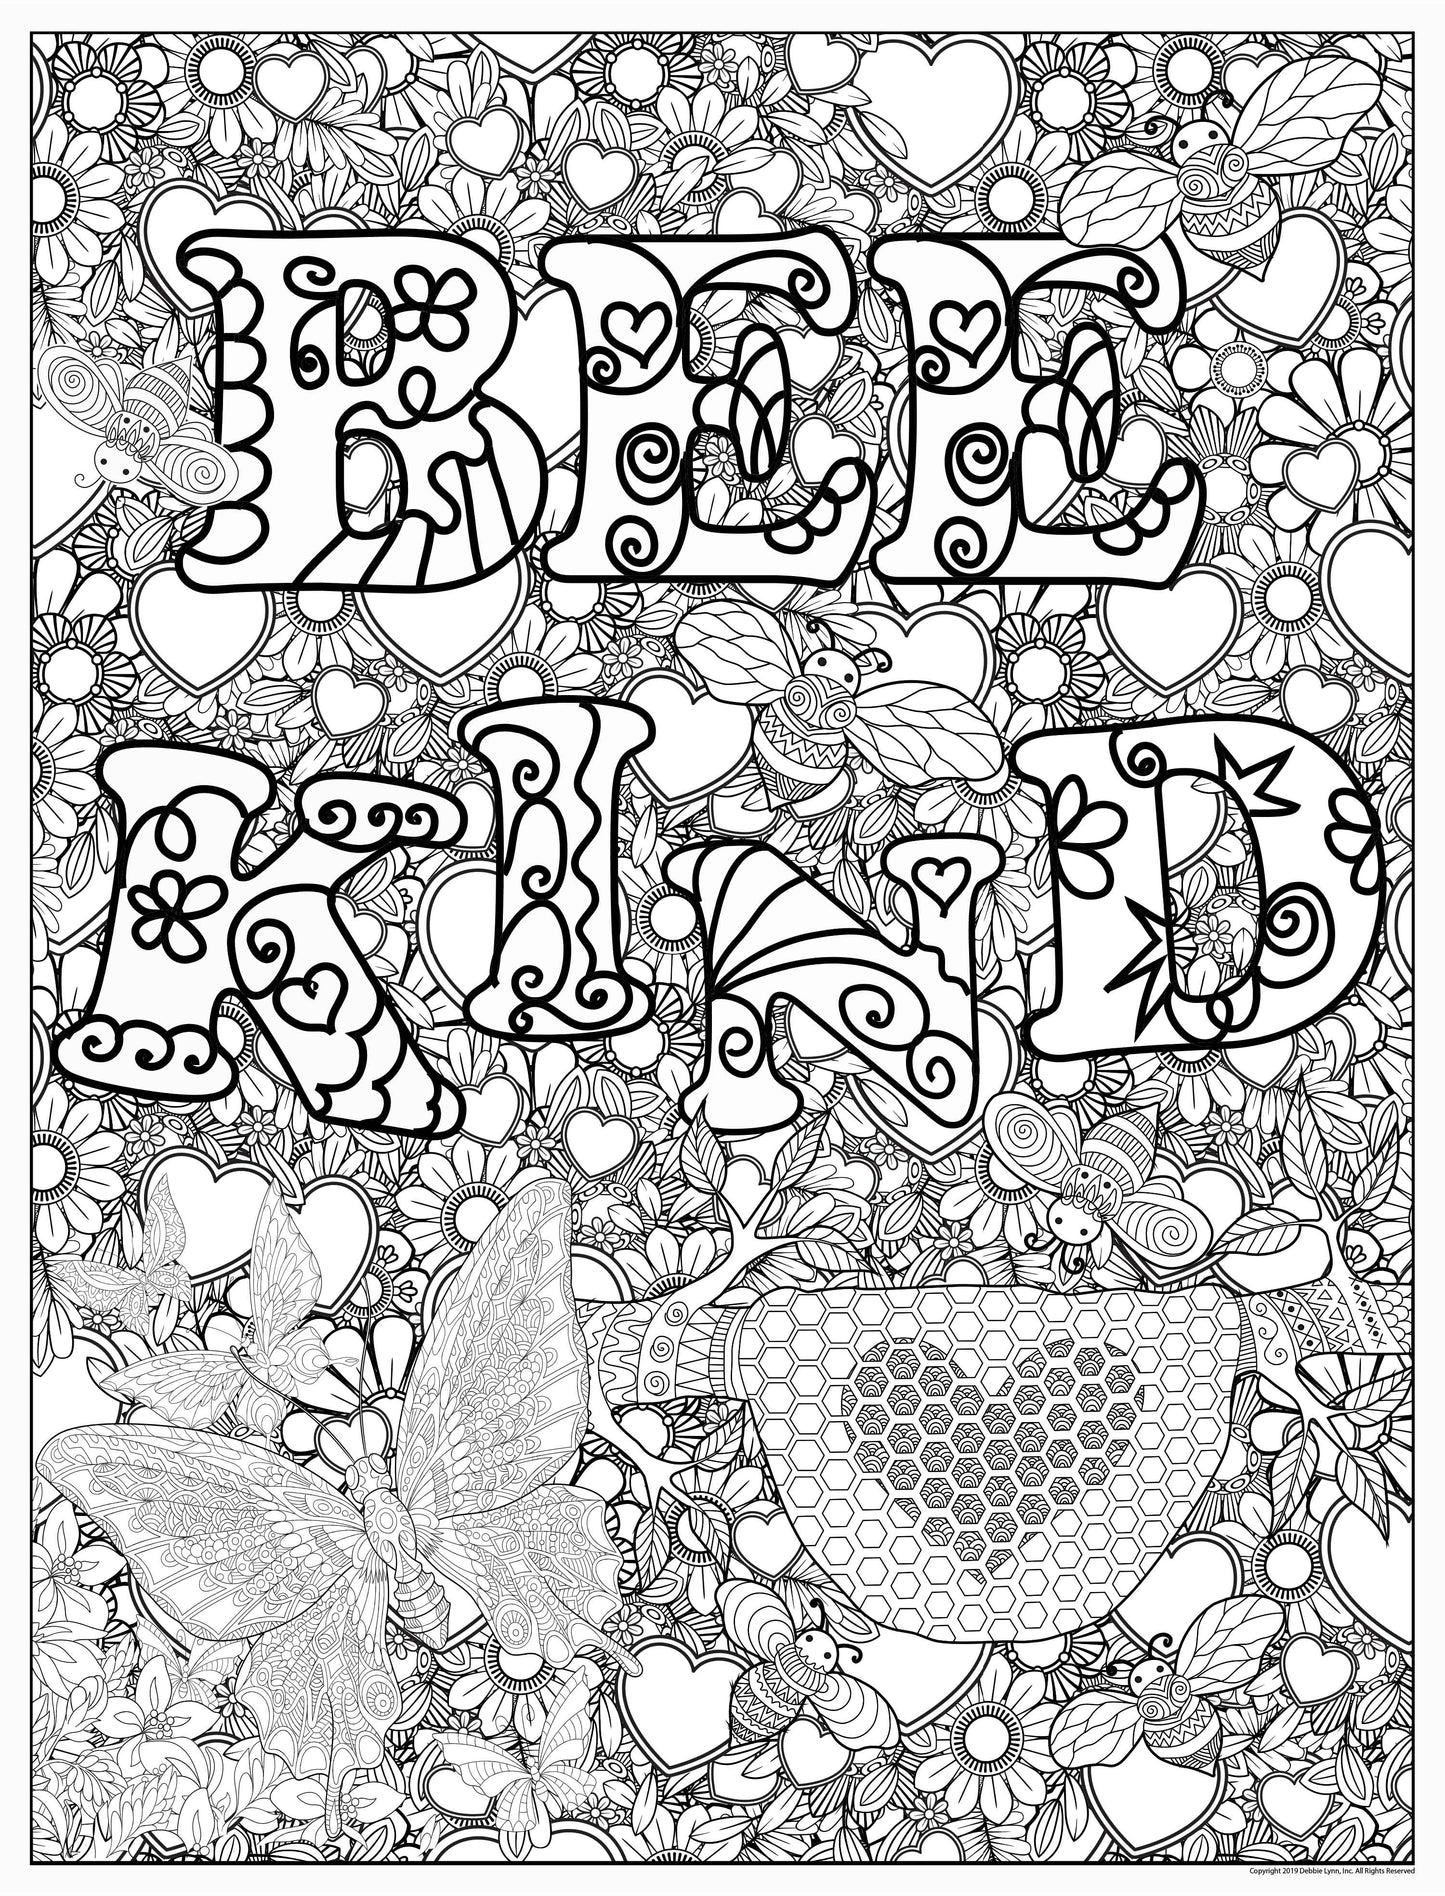 Bee Kind Personalized Giant Coloring Poster 46" x 60"